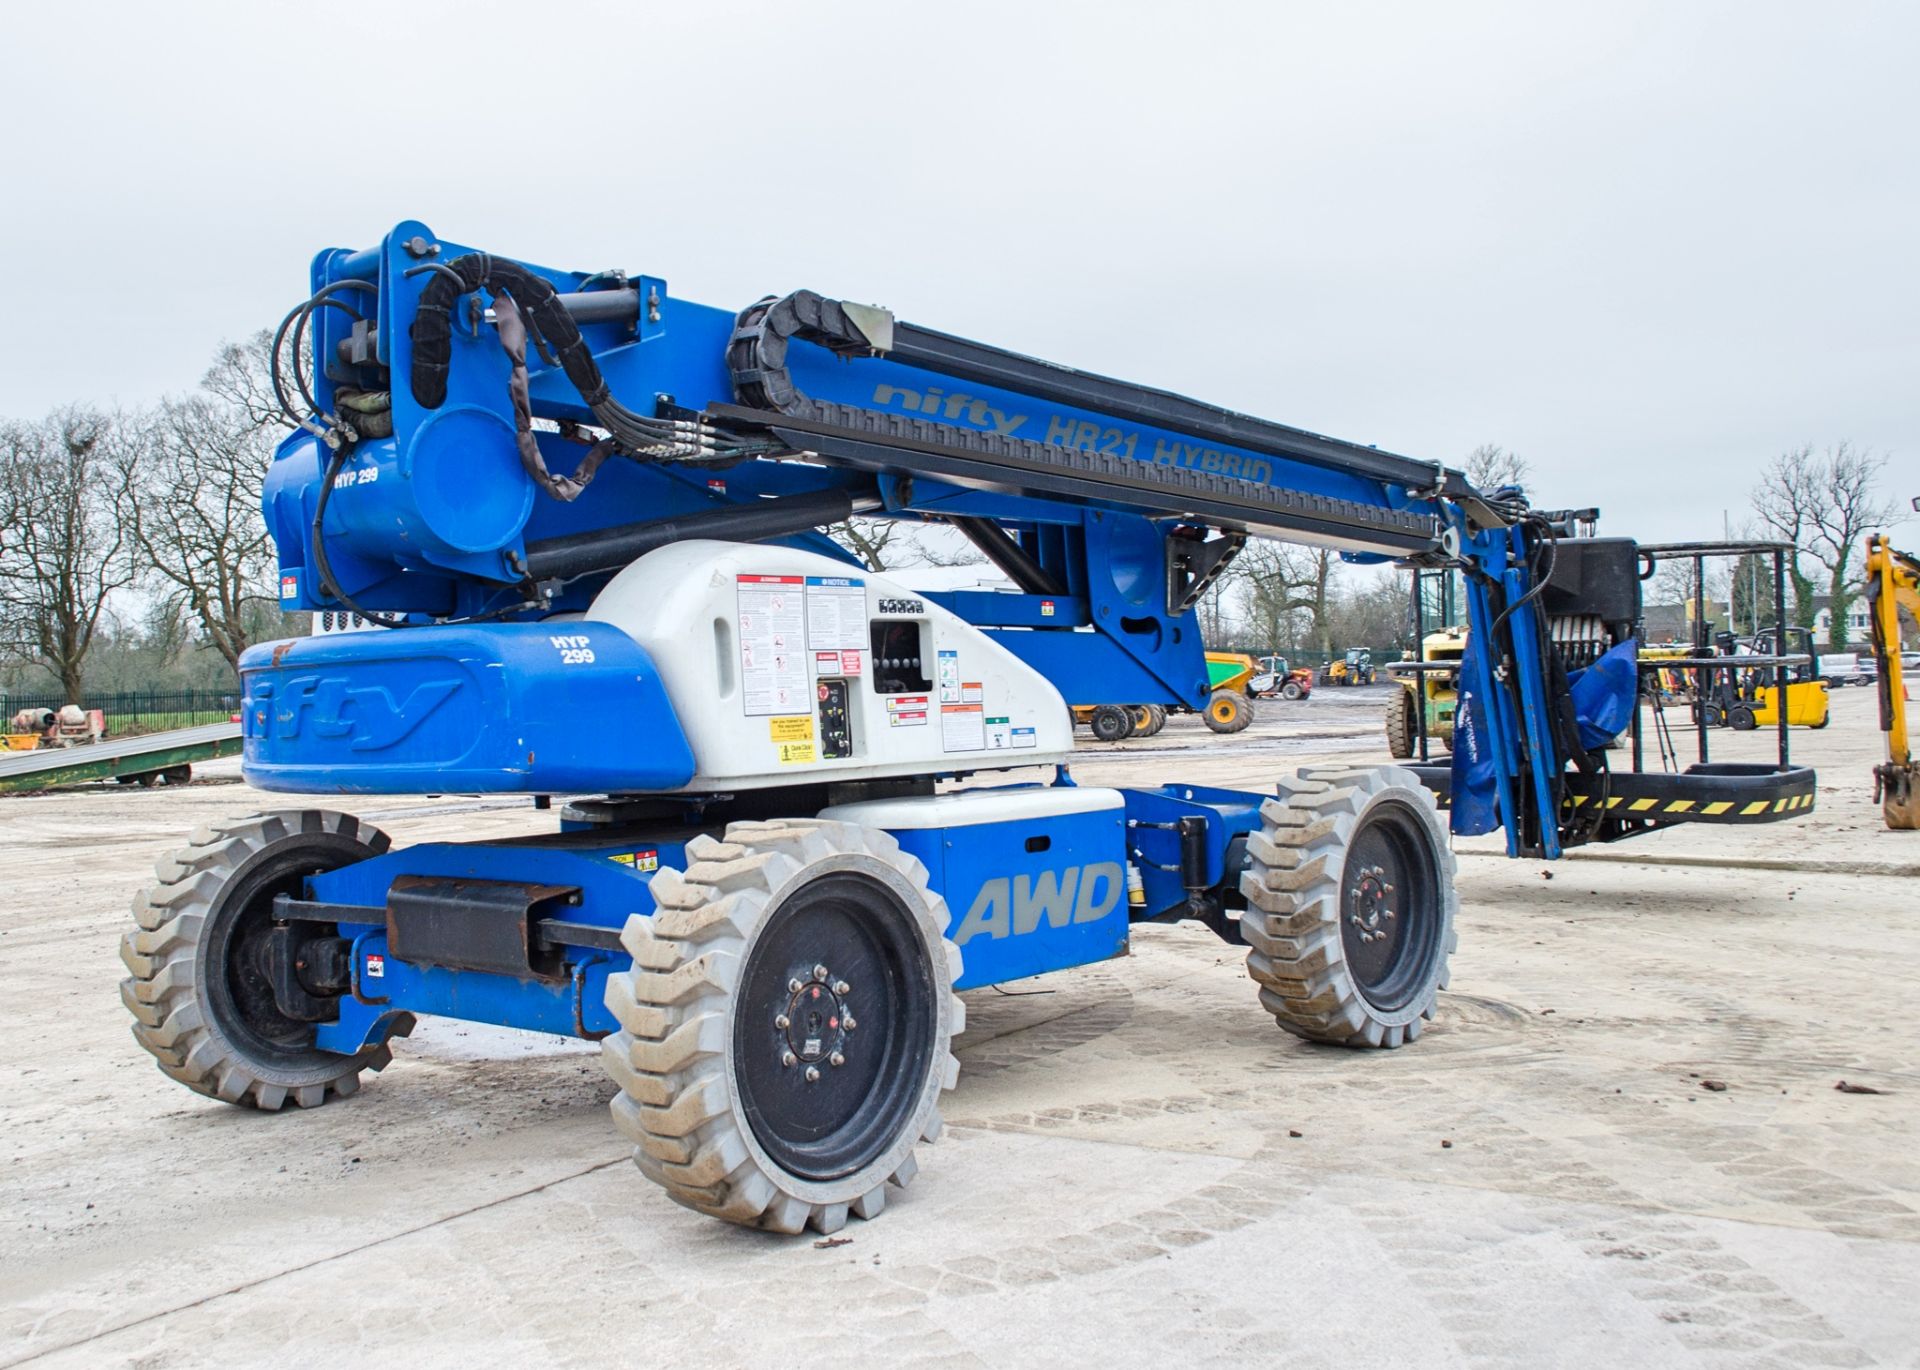 Nifty HR21 Hybrid diesel/battery articulated boom lift access platform Year: 2014 S/N: 2127663 HYP - Image 3 of 13